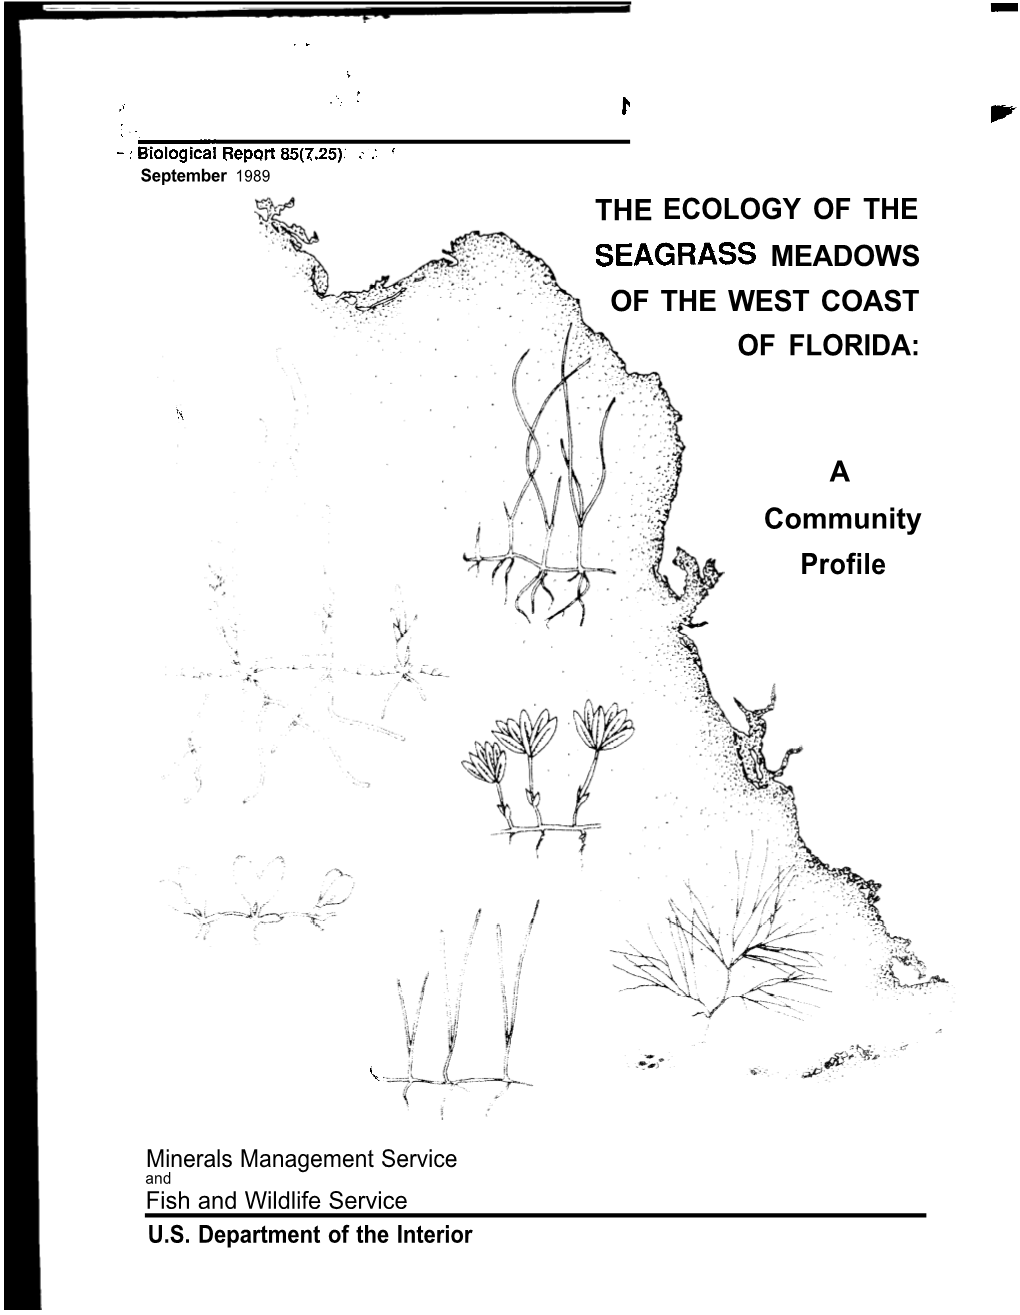 The Ecology of the Seagrass Meadows of the West Coast of Florida